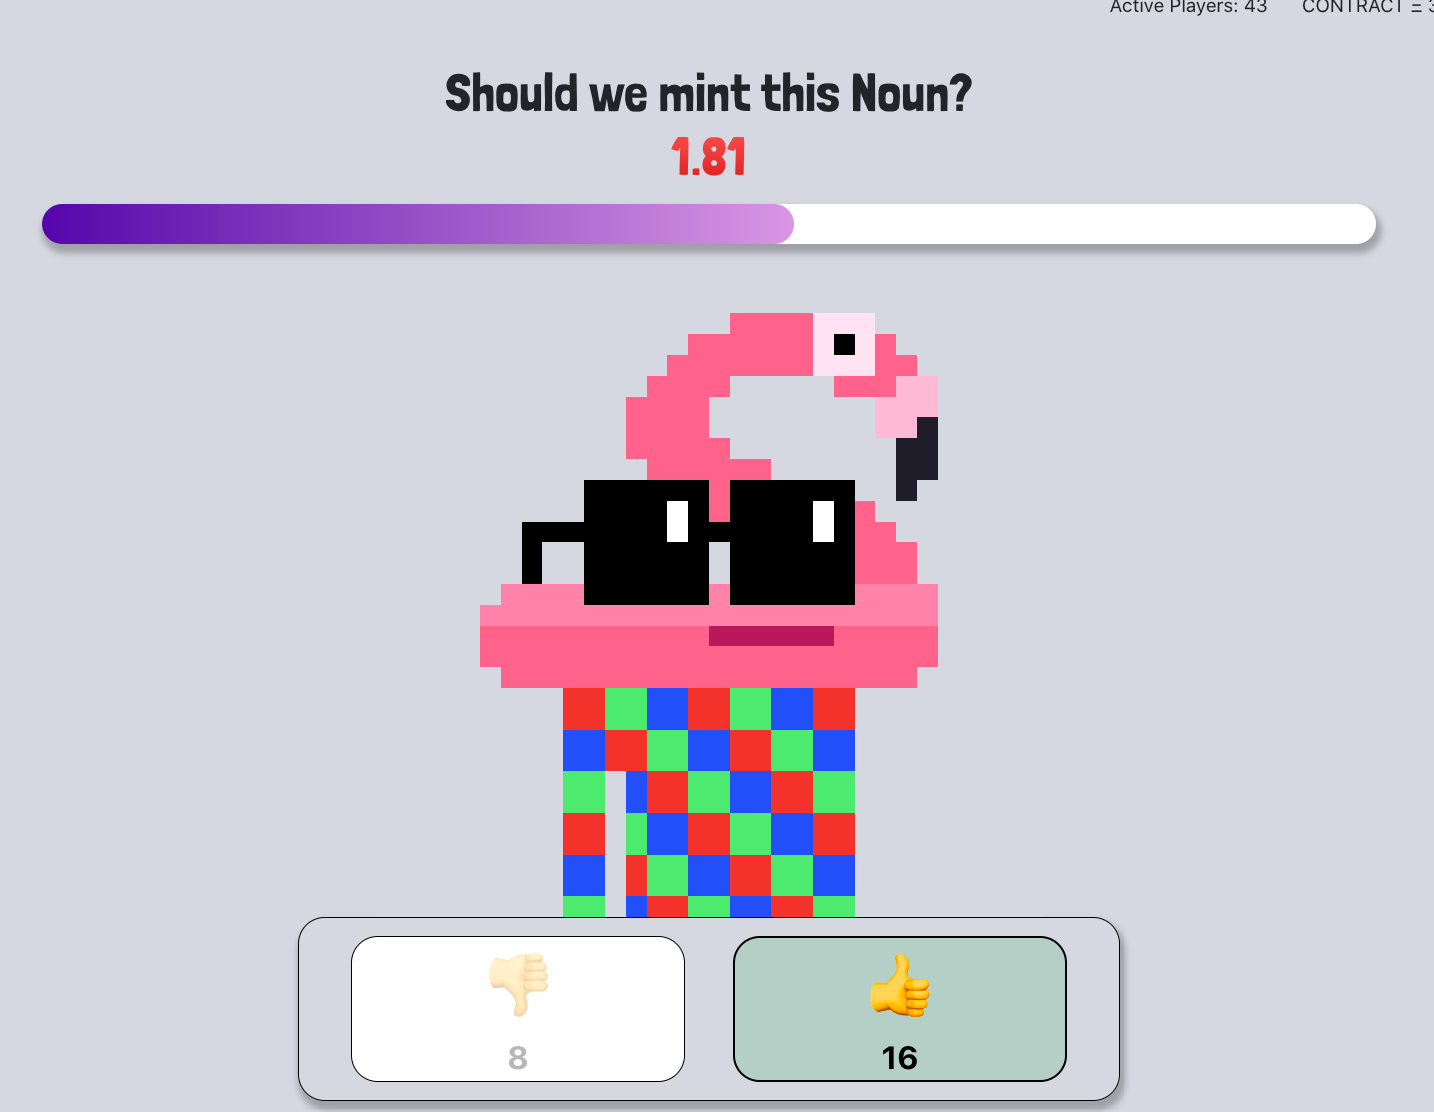 Part of “Noun’o’clock” includes a social engagement tactic called “Fomo Nouns” where randomized Nouns appear (like this flamingo-headed avatar) and participants quickly vote on which one to mint. (via: https://fomonouns.wtf/)